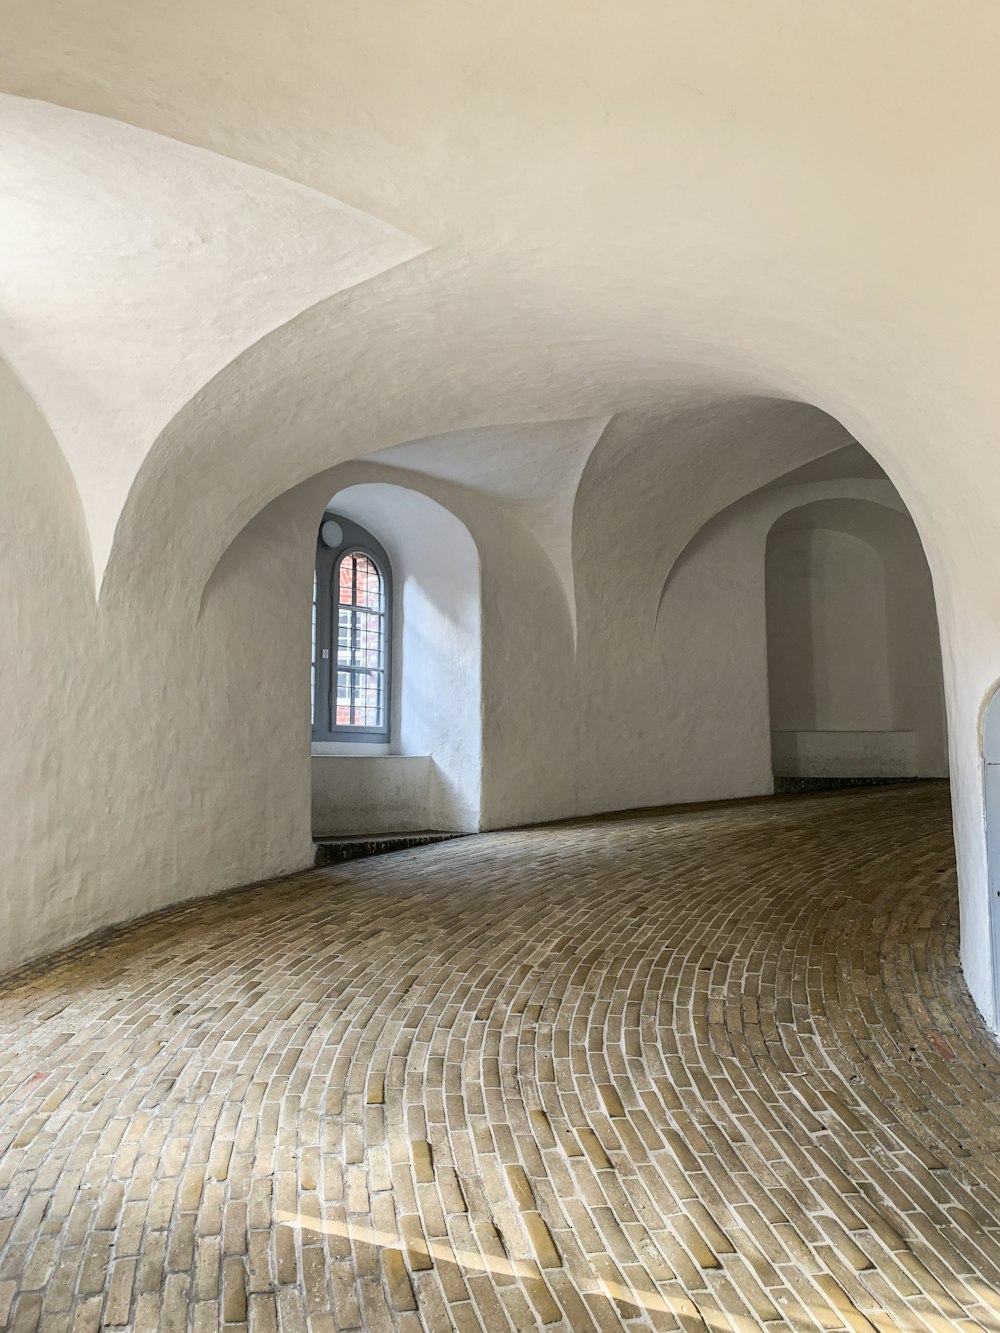 a room with a brick floor and arched windows